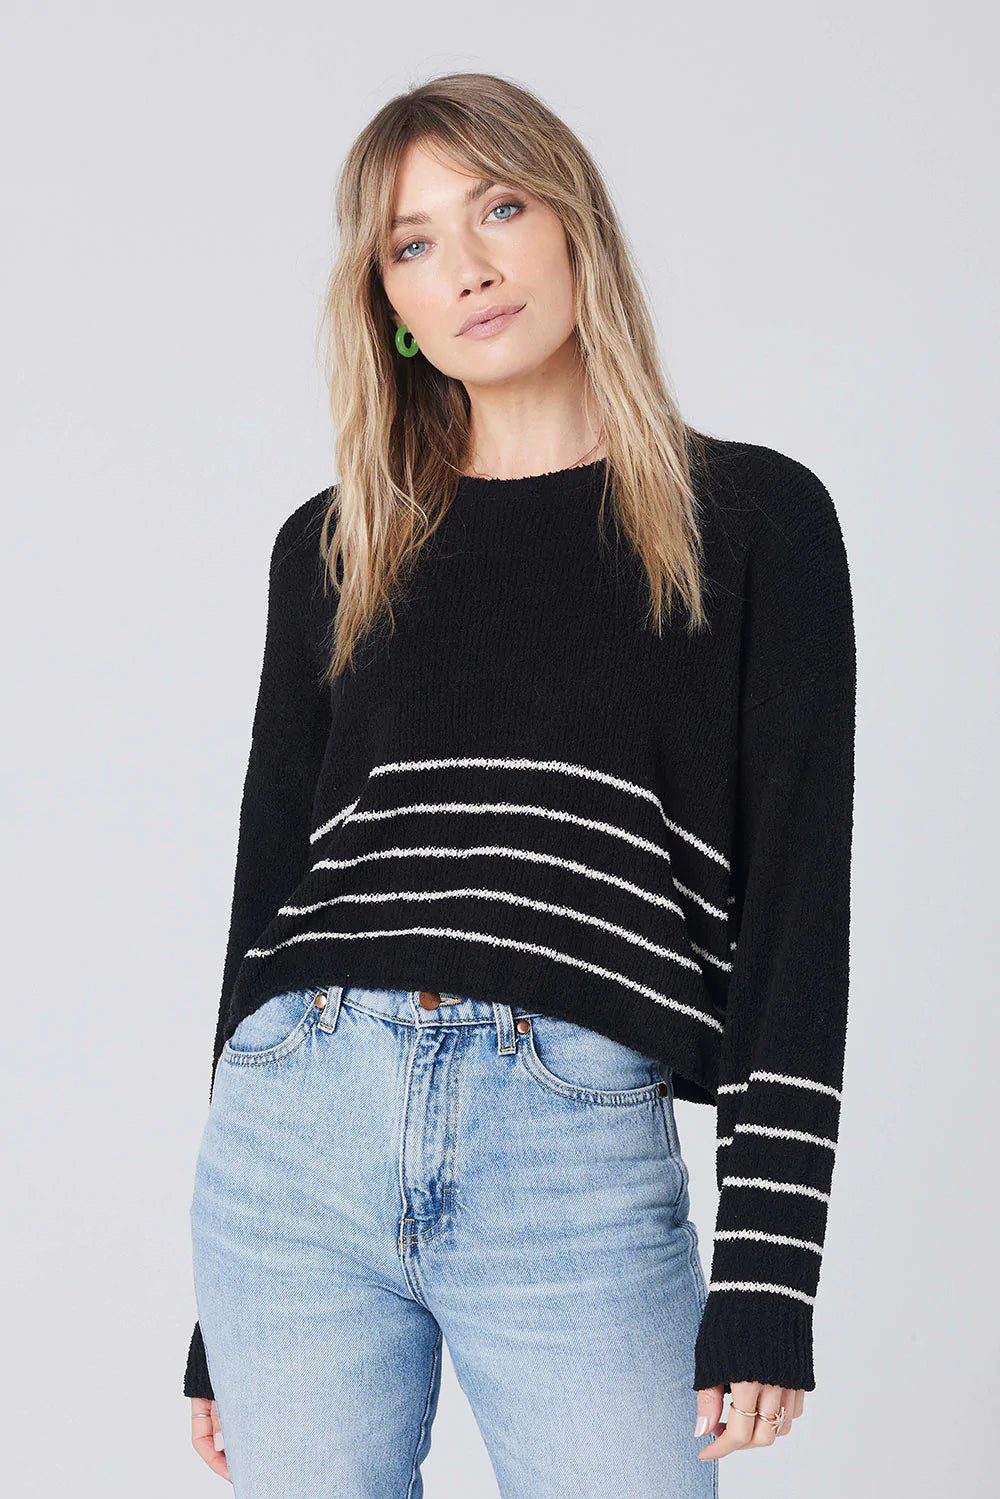 Saltwater Luxe - Tower Sweater - Council Studio